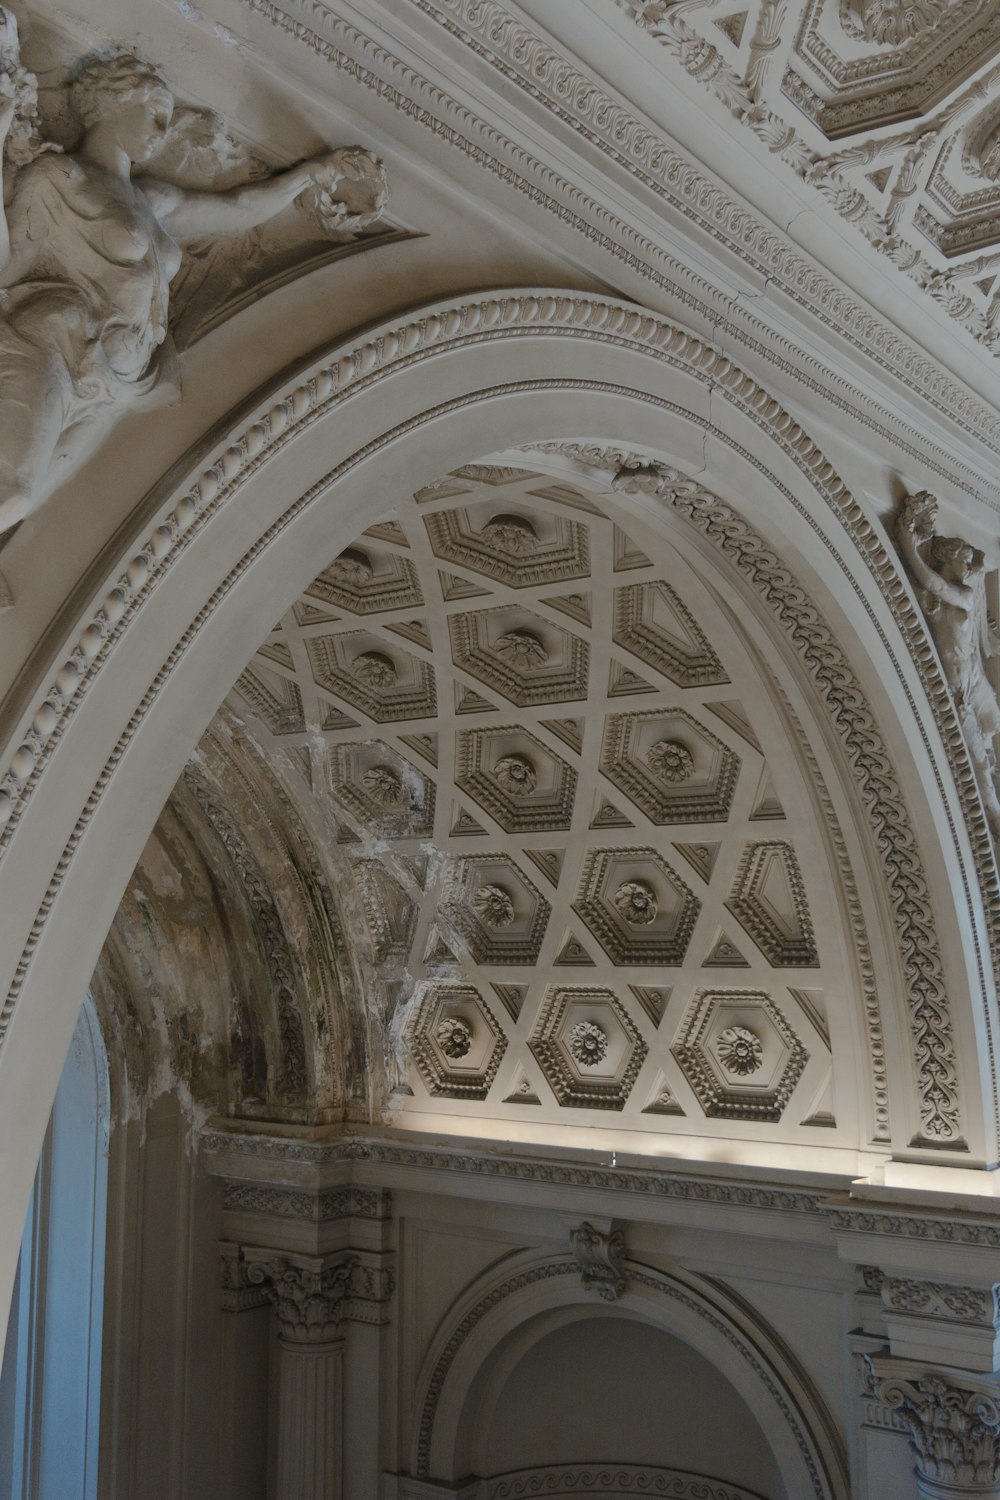 the ceiling of a building with a statue on it